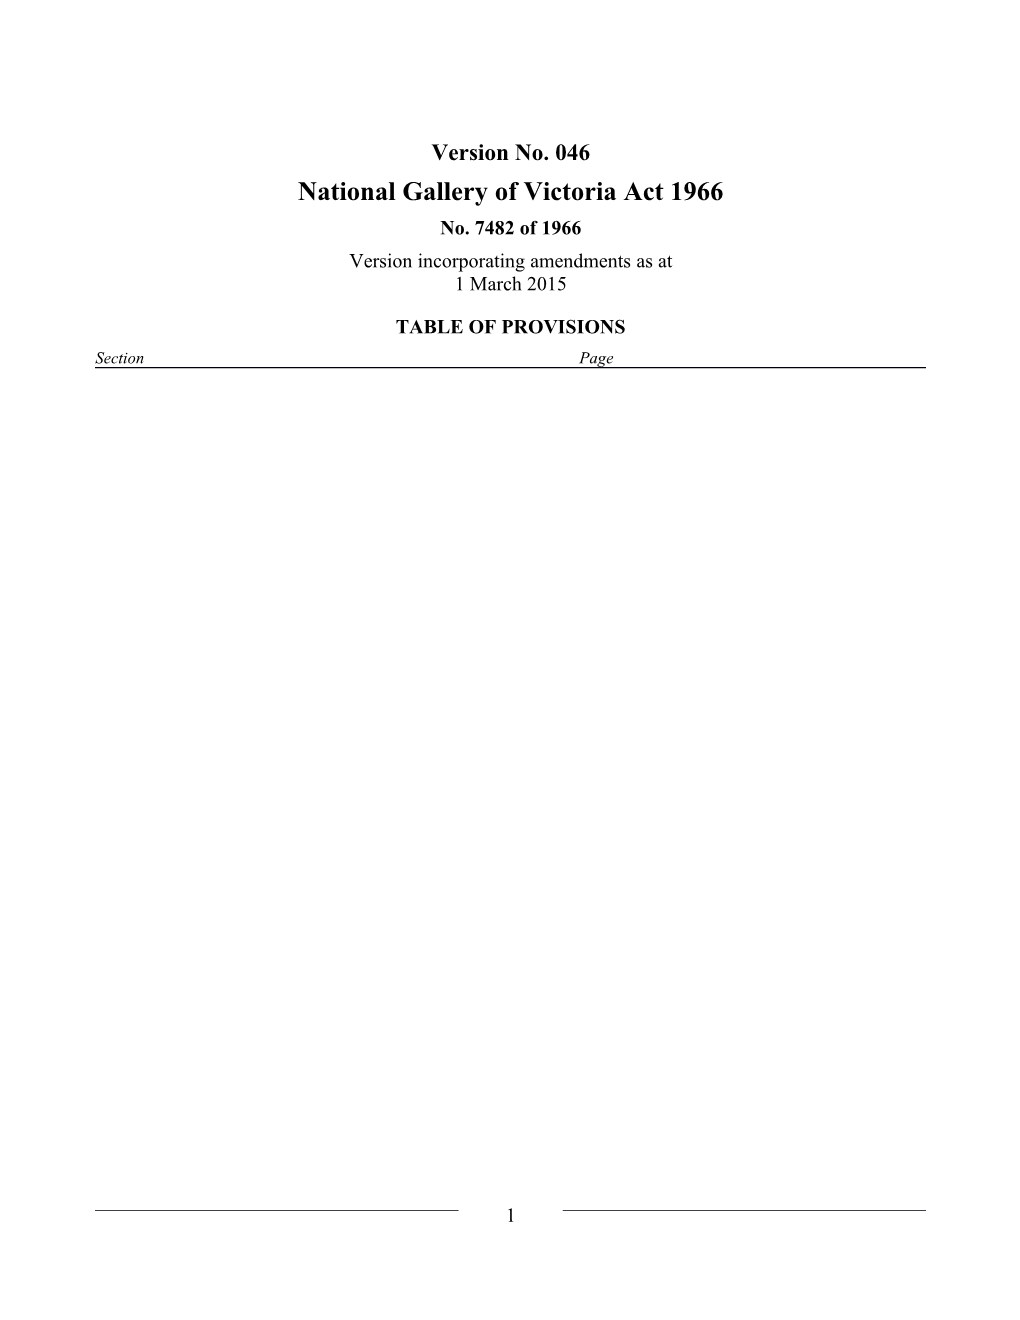 National Gallery of Victoria Act 1966